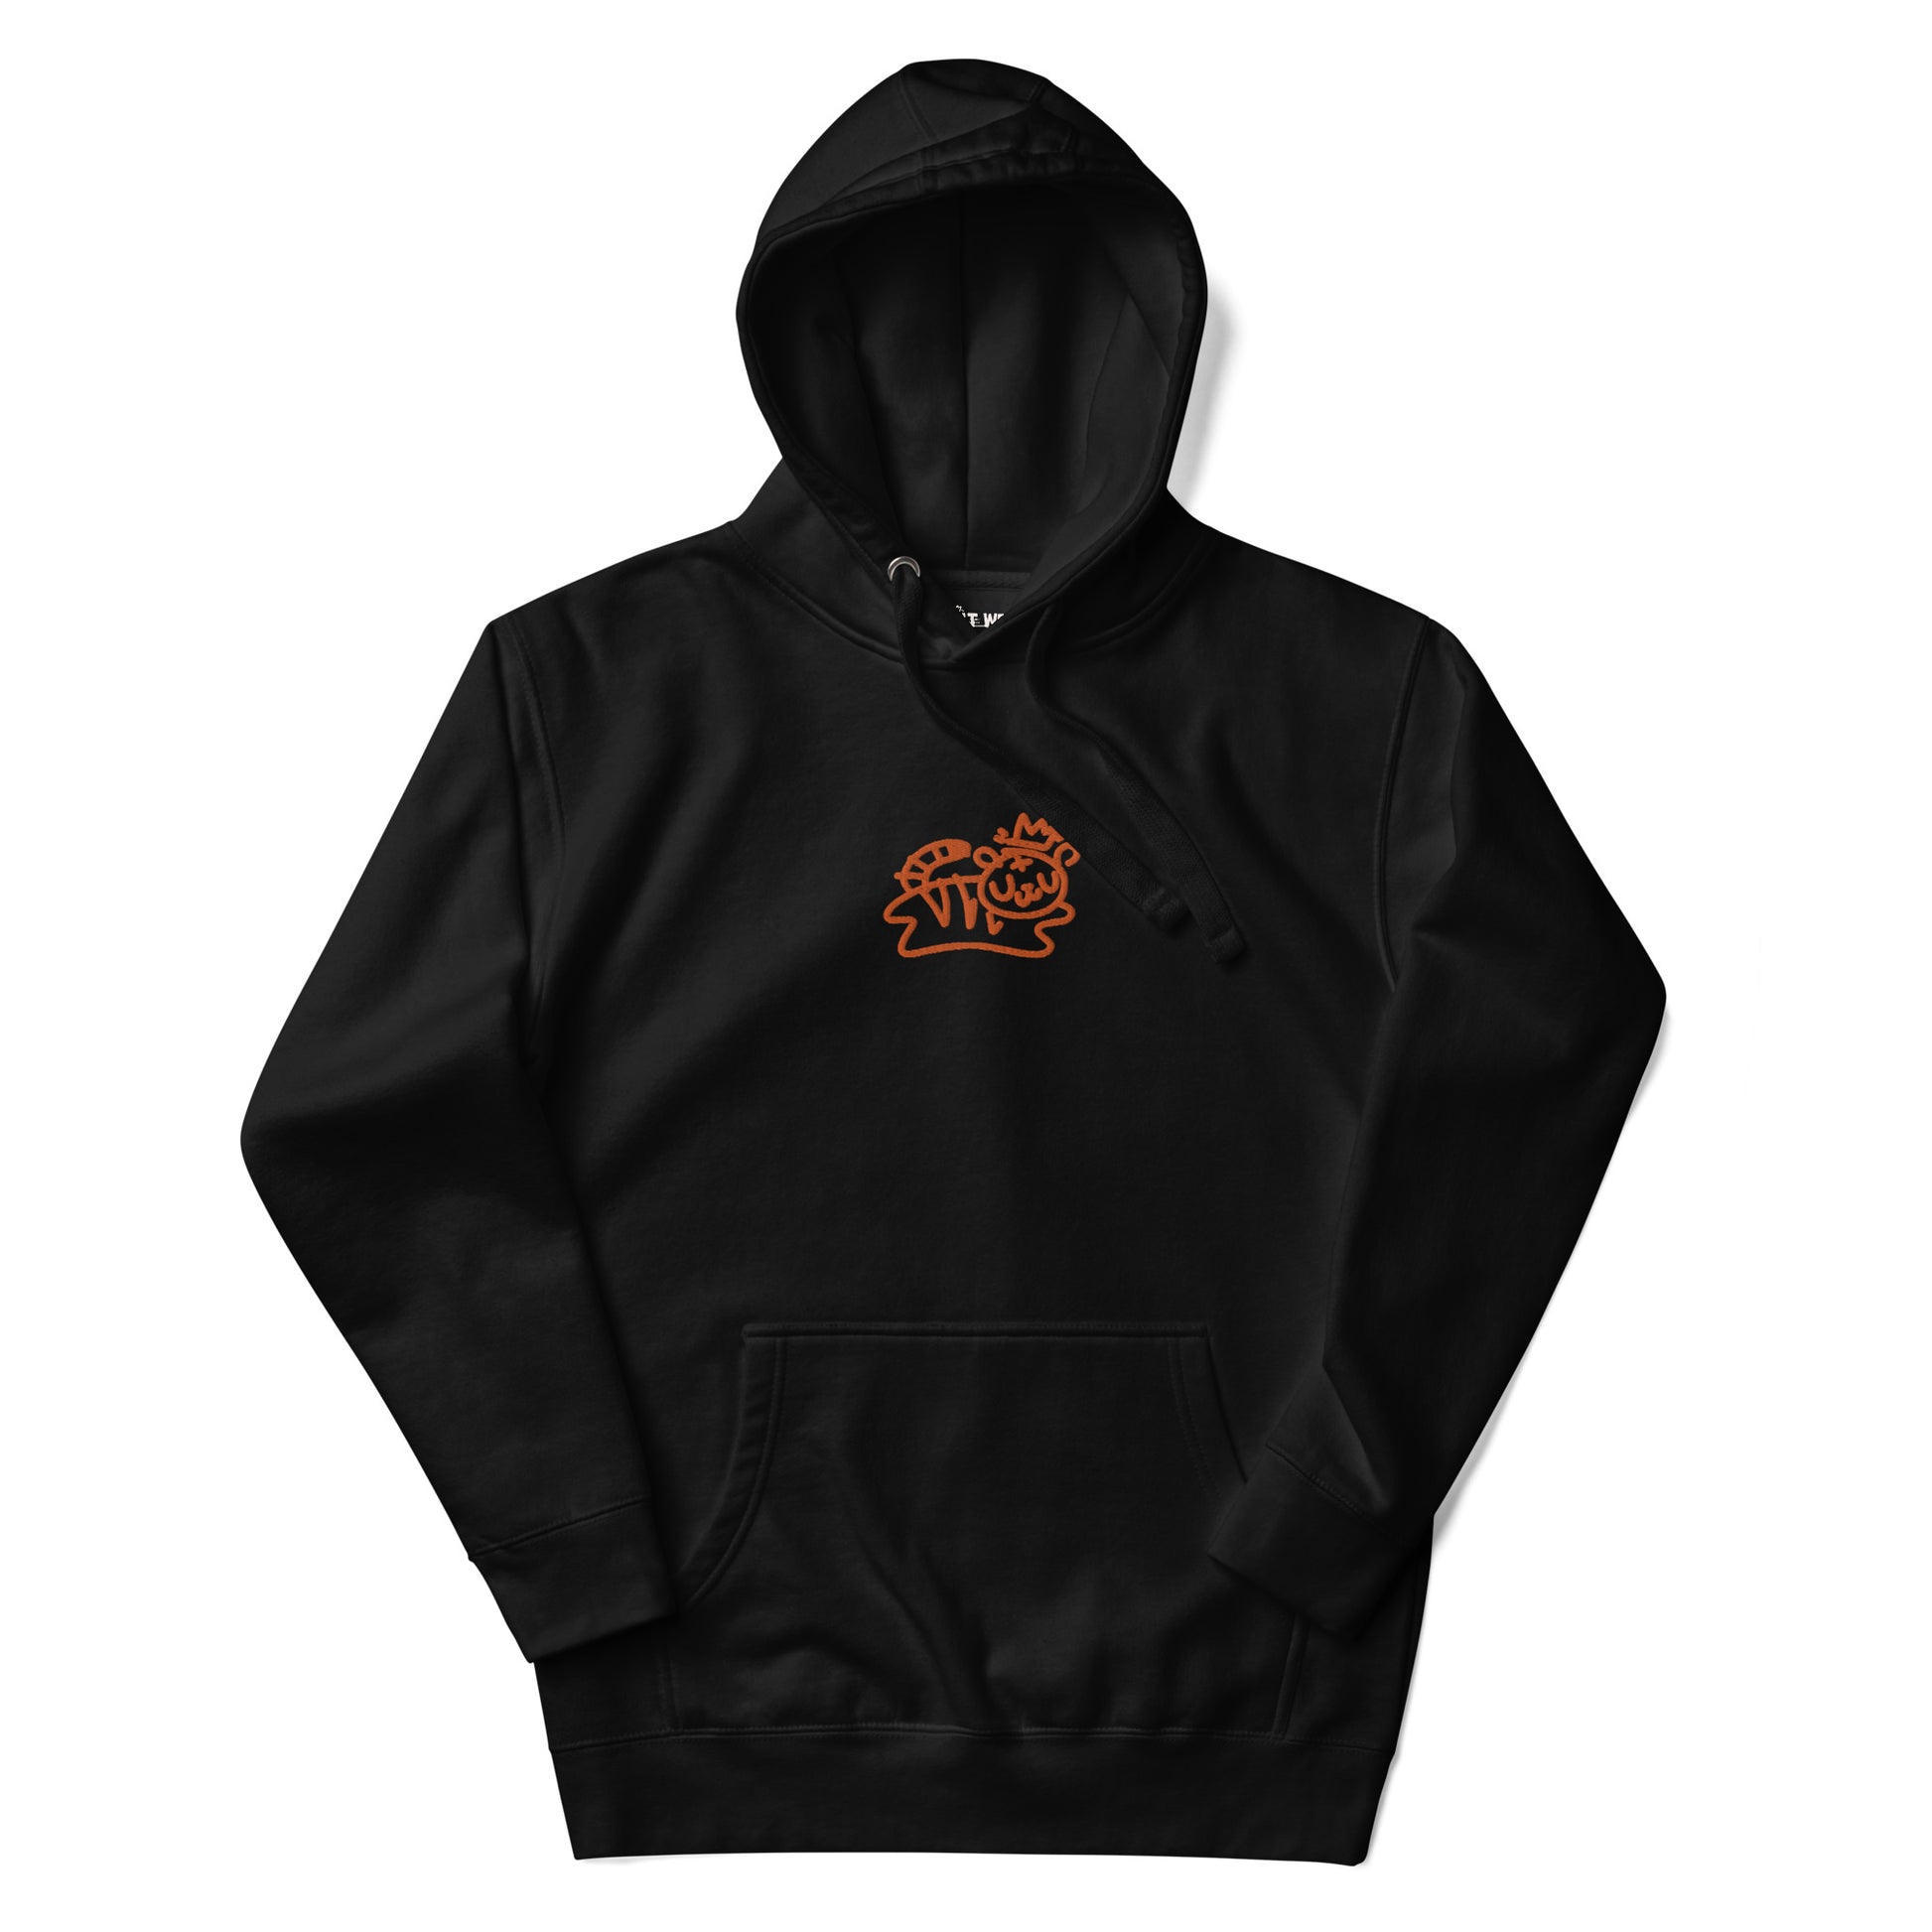 black pullover hoodie with embroidered bolt-wear tiger logo on chest 